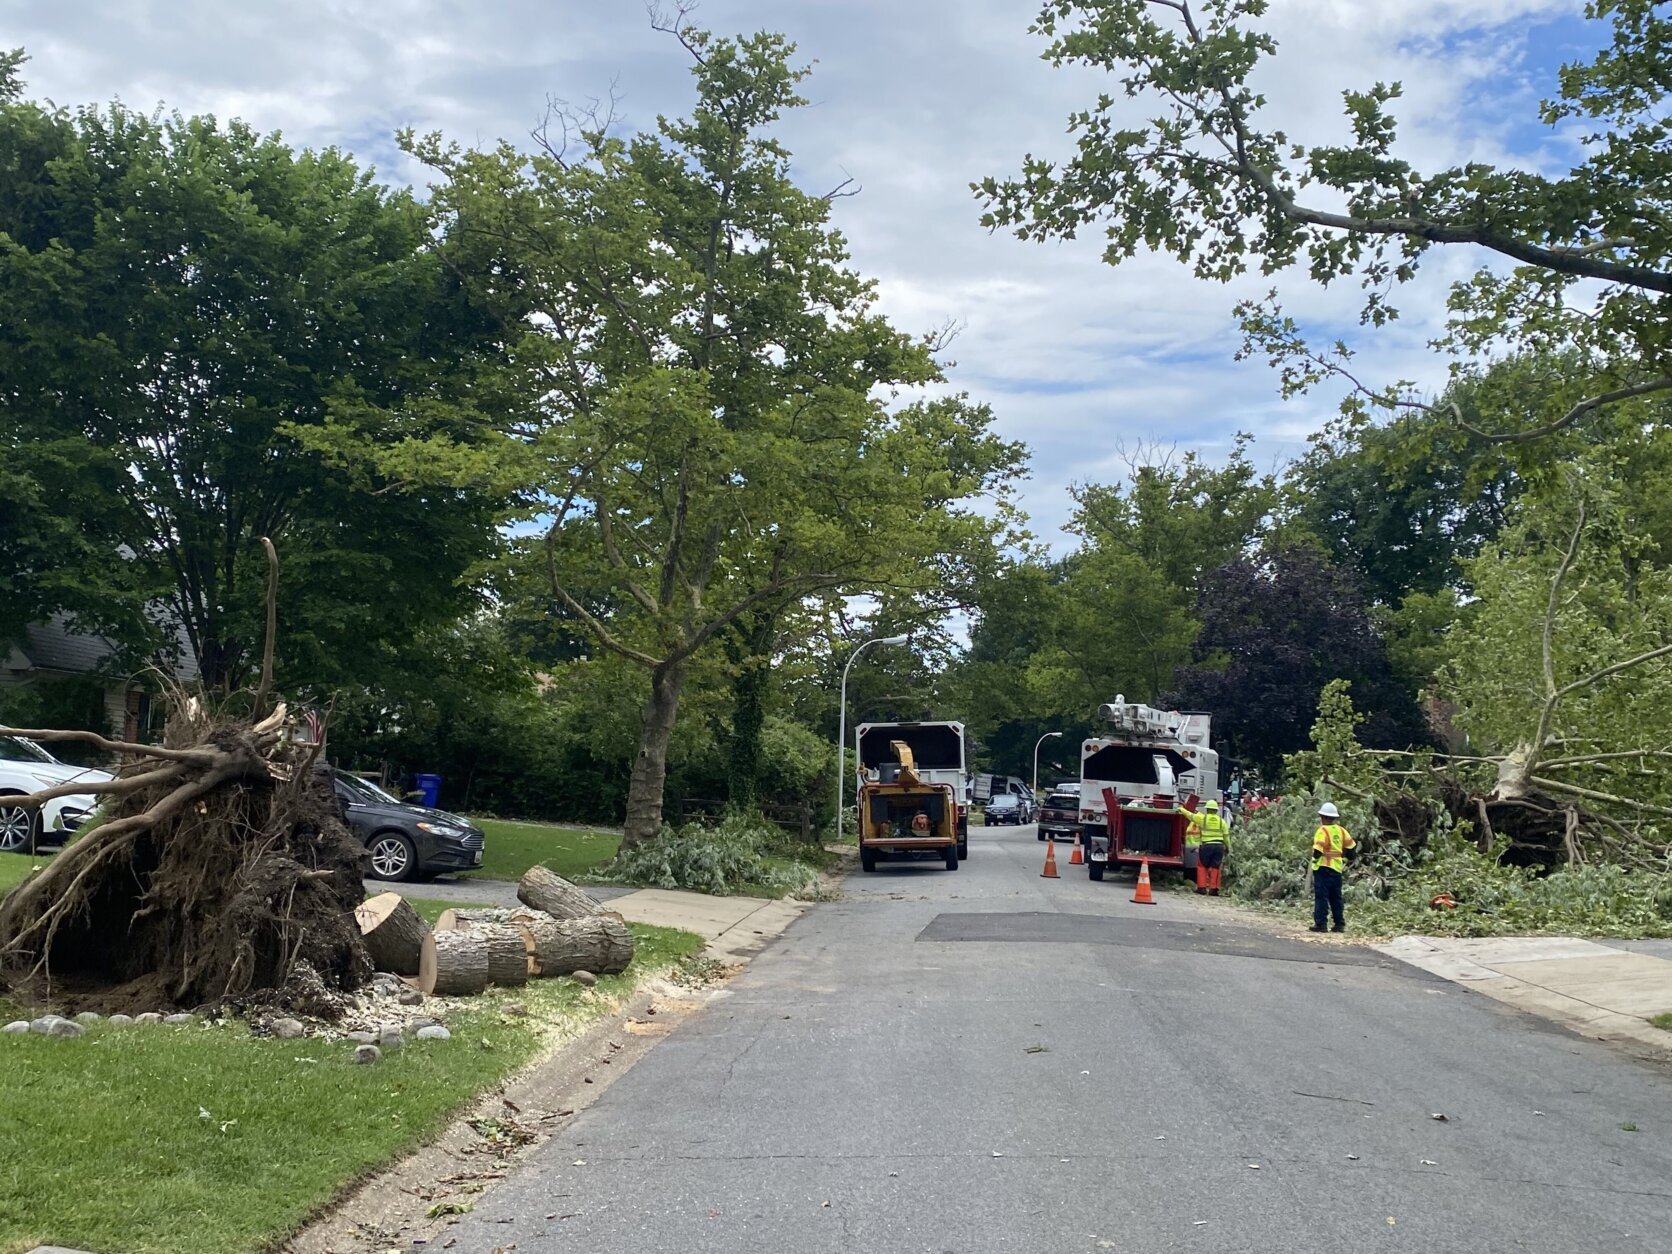 The cleanup was underway Wednesday in Bowie, Maryland, after Tuesday's storms downed trees and power lines and damaged some homes.